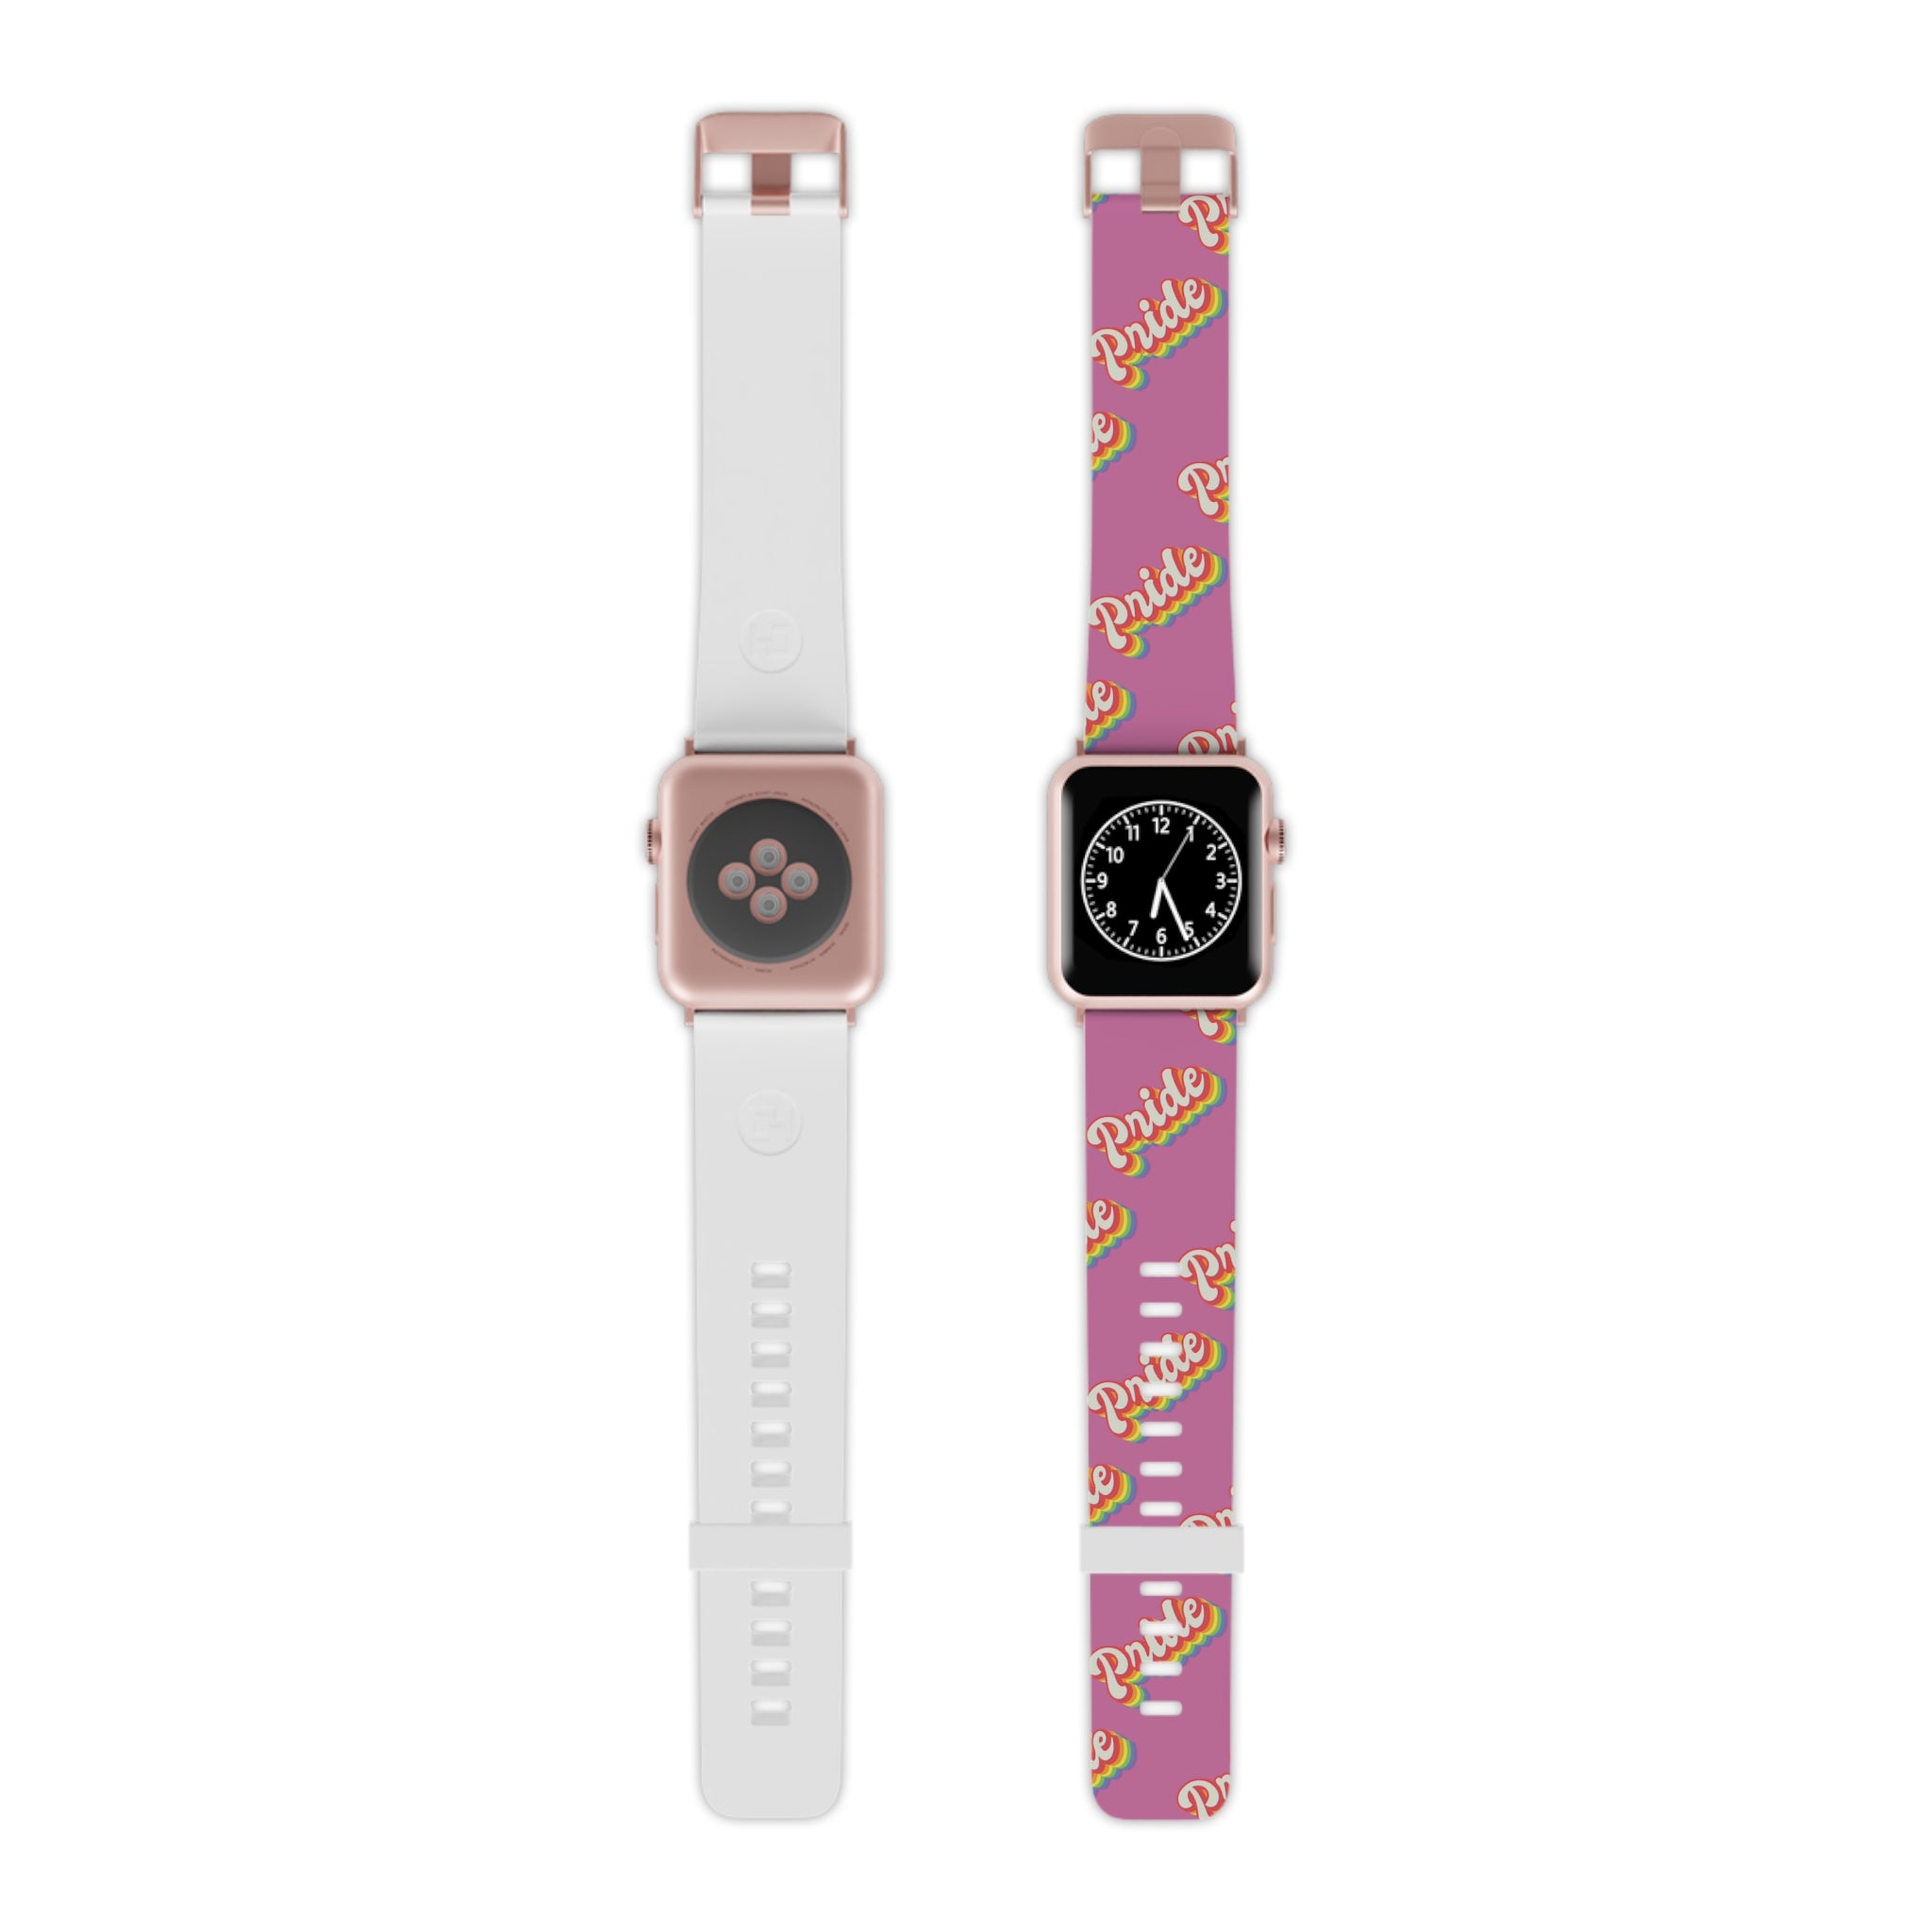 Two pink and white custom-printed Pride Bands for Apple Watch on a white background.